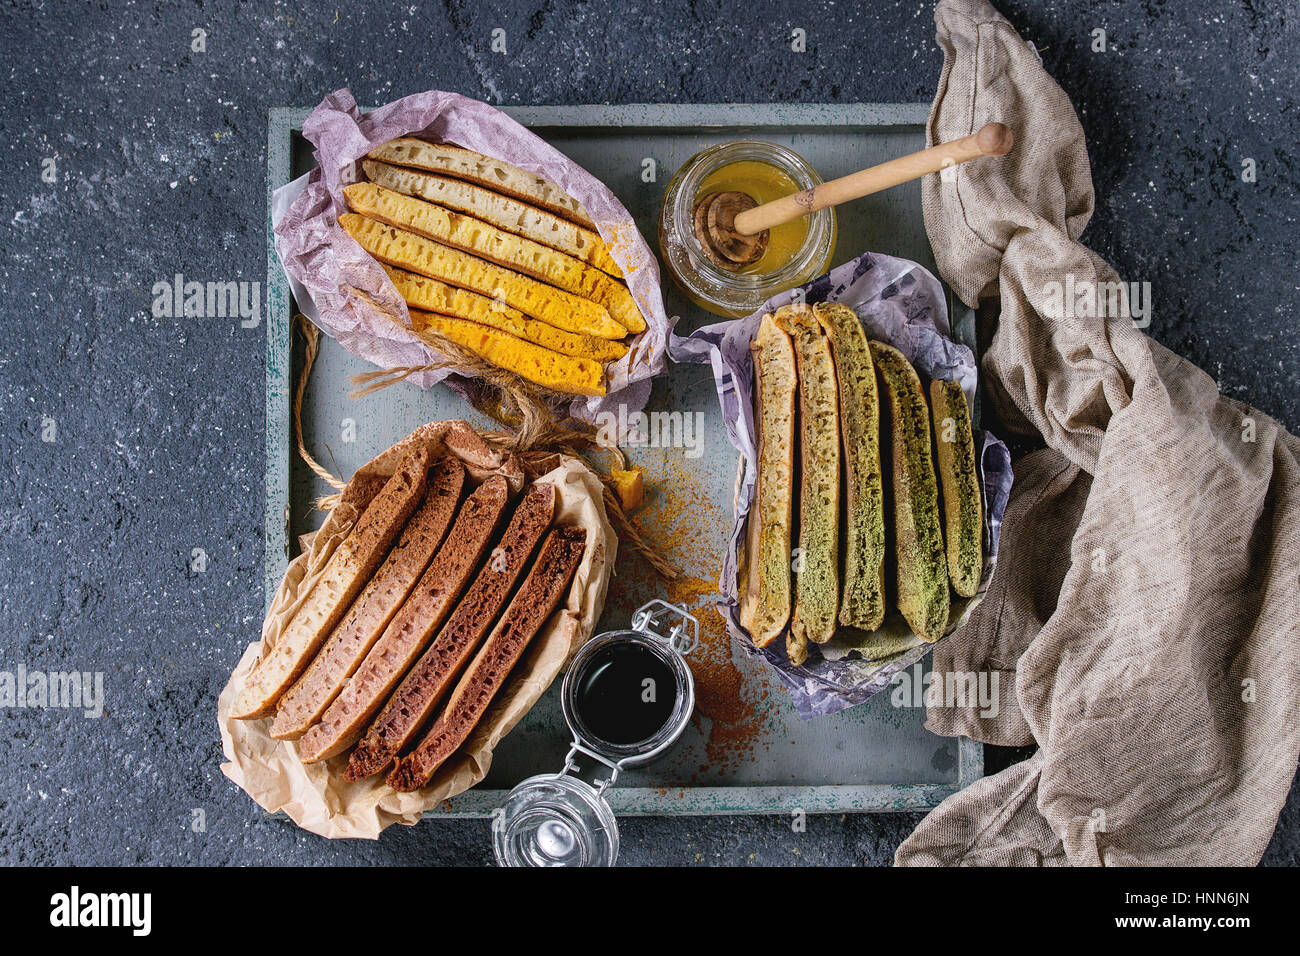 Variety of ombre pancakes Stock Photo